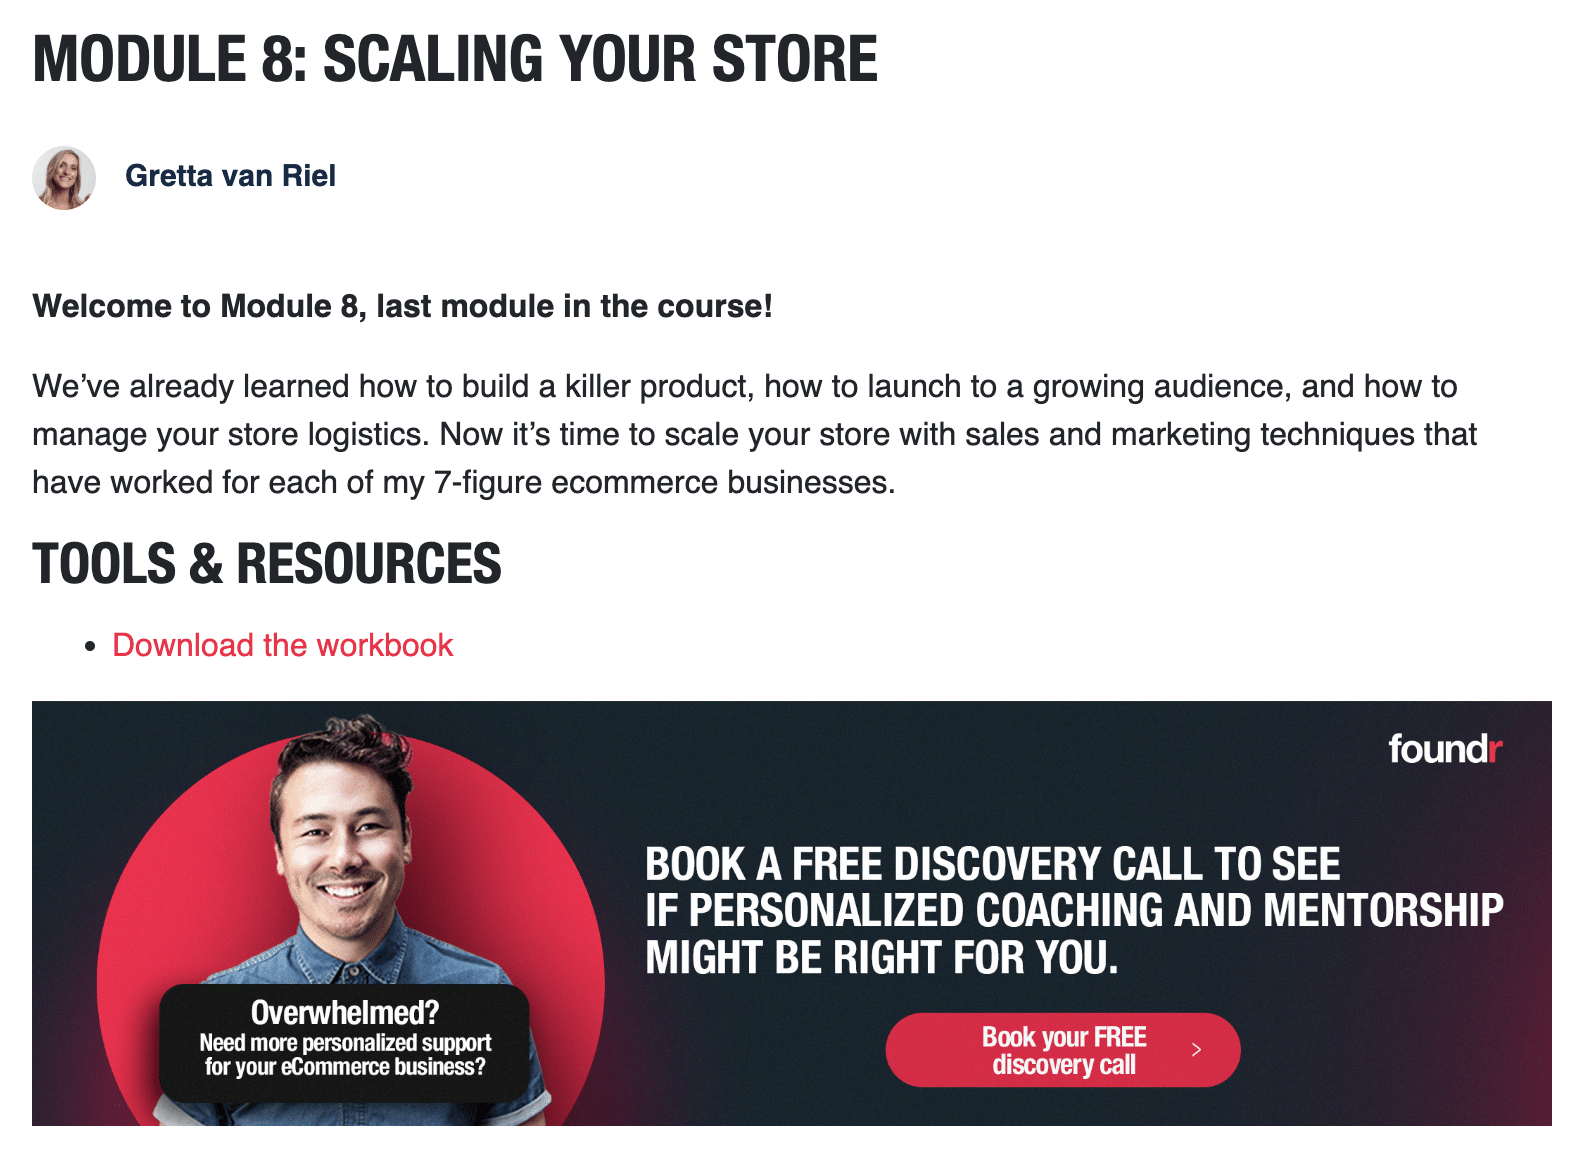 Module 8: Scaling Your Store